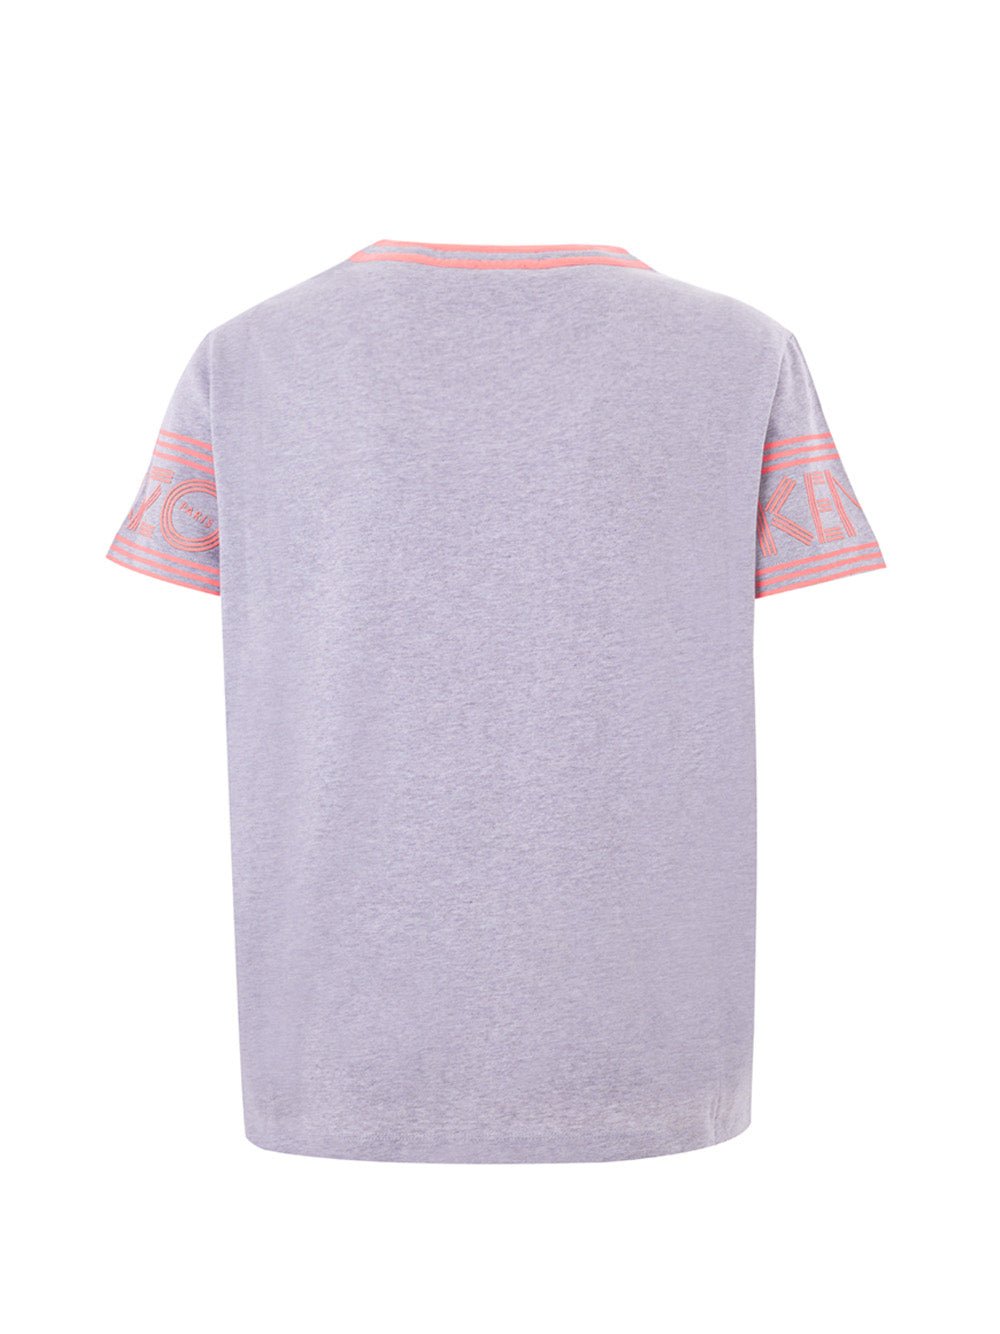 Kenzo Grey Mélange Cotton T-Shirt with Contrasting Logo